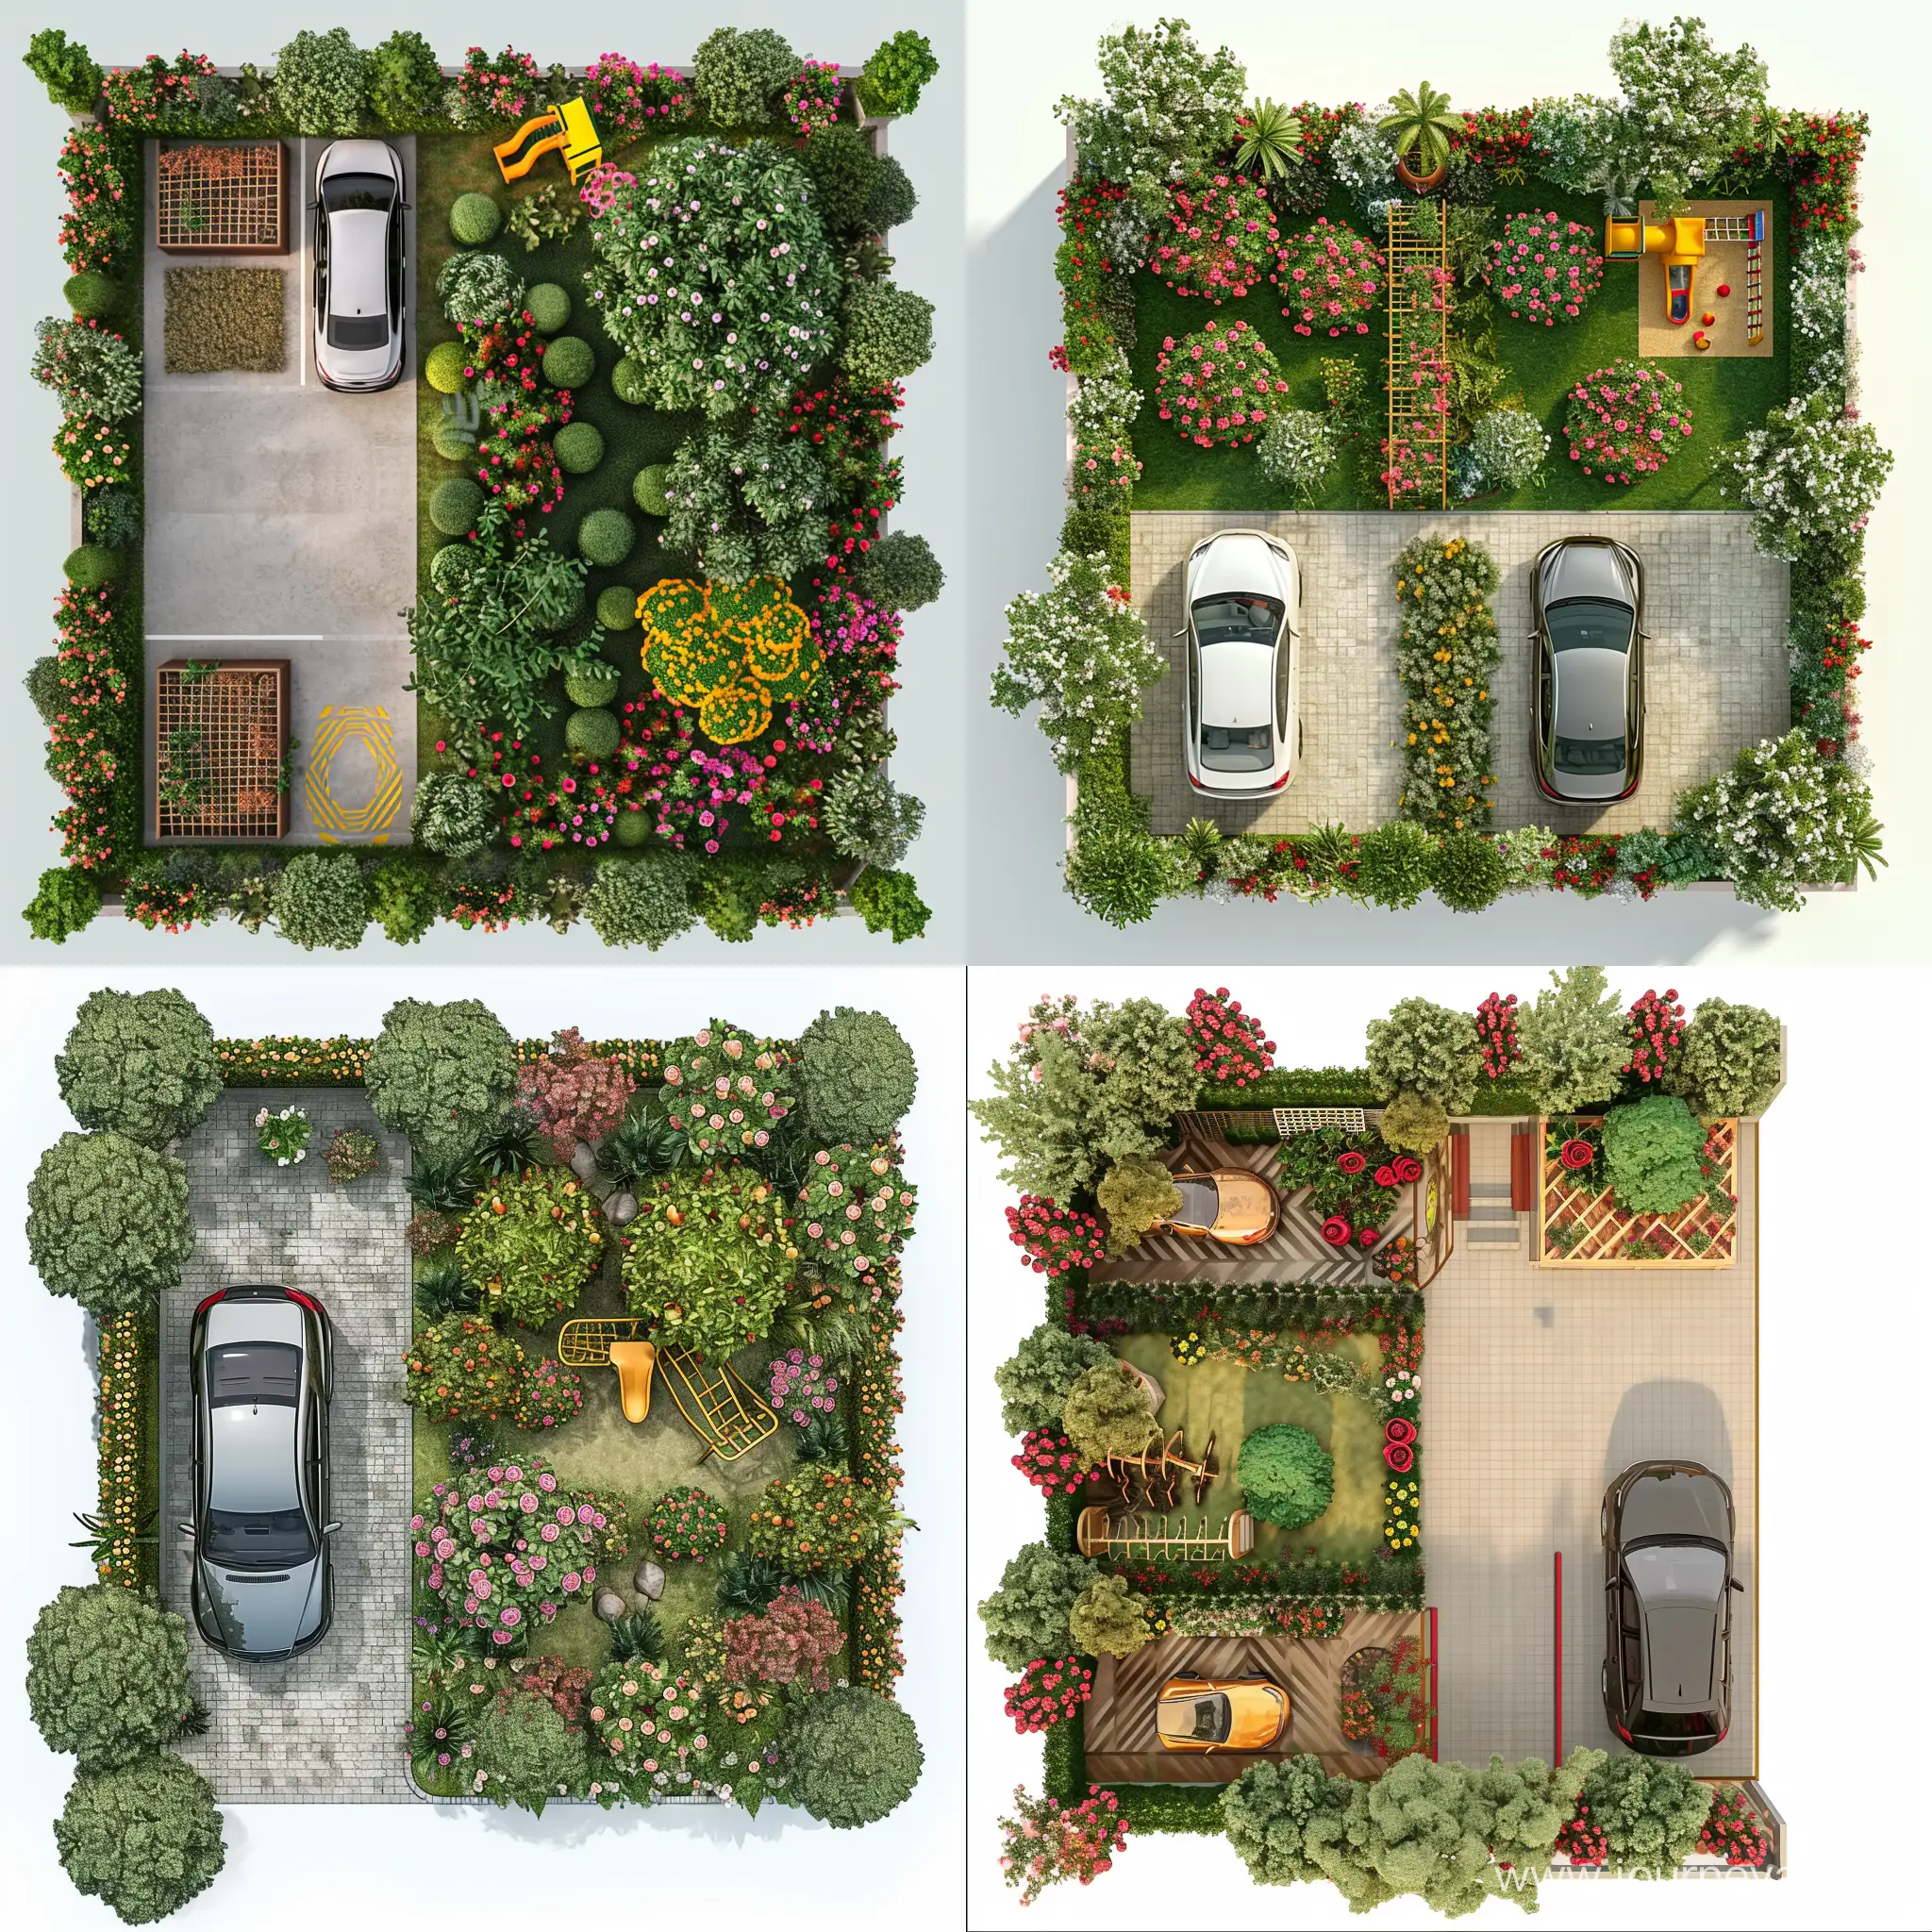 Spacious-22x15-Meter-Garden-with-Parking-for-Two-Cars-and-Playful-Oasis